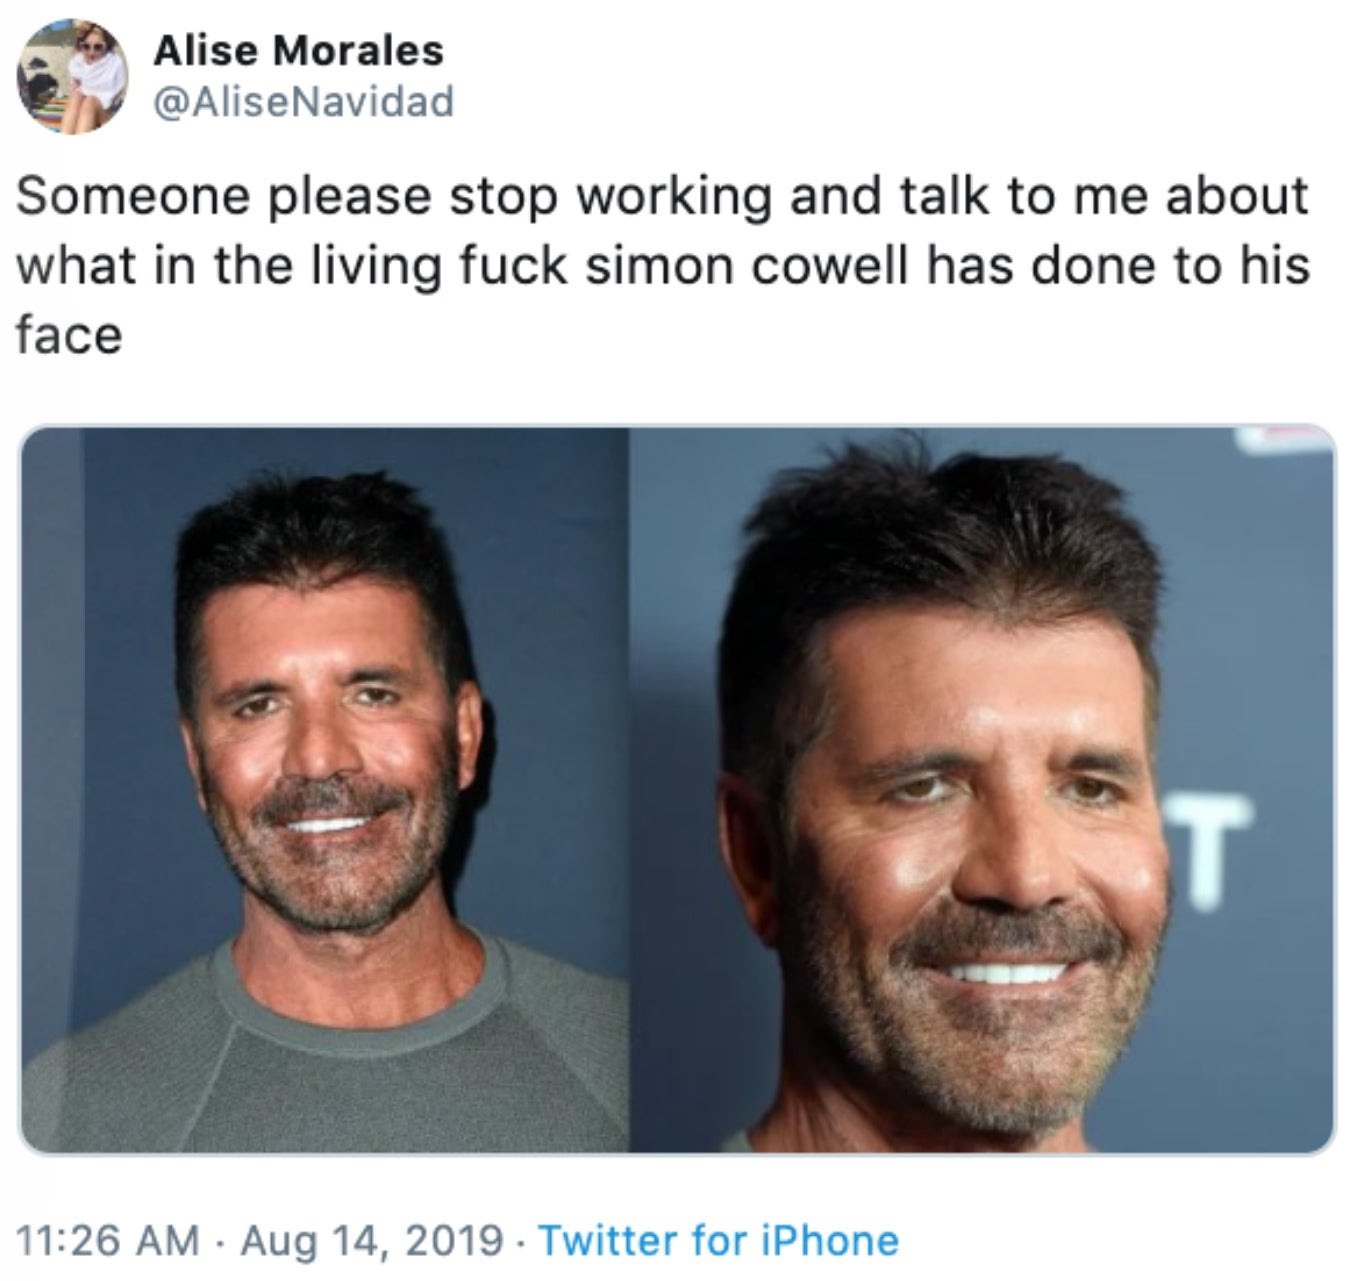 simon cowell face meme - Alise Morales Someone please stop working and talk to me about what in the living fuck simon cowell has done to his face . Twitter for iPhone